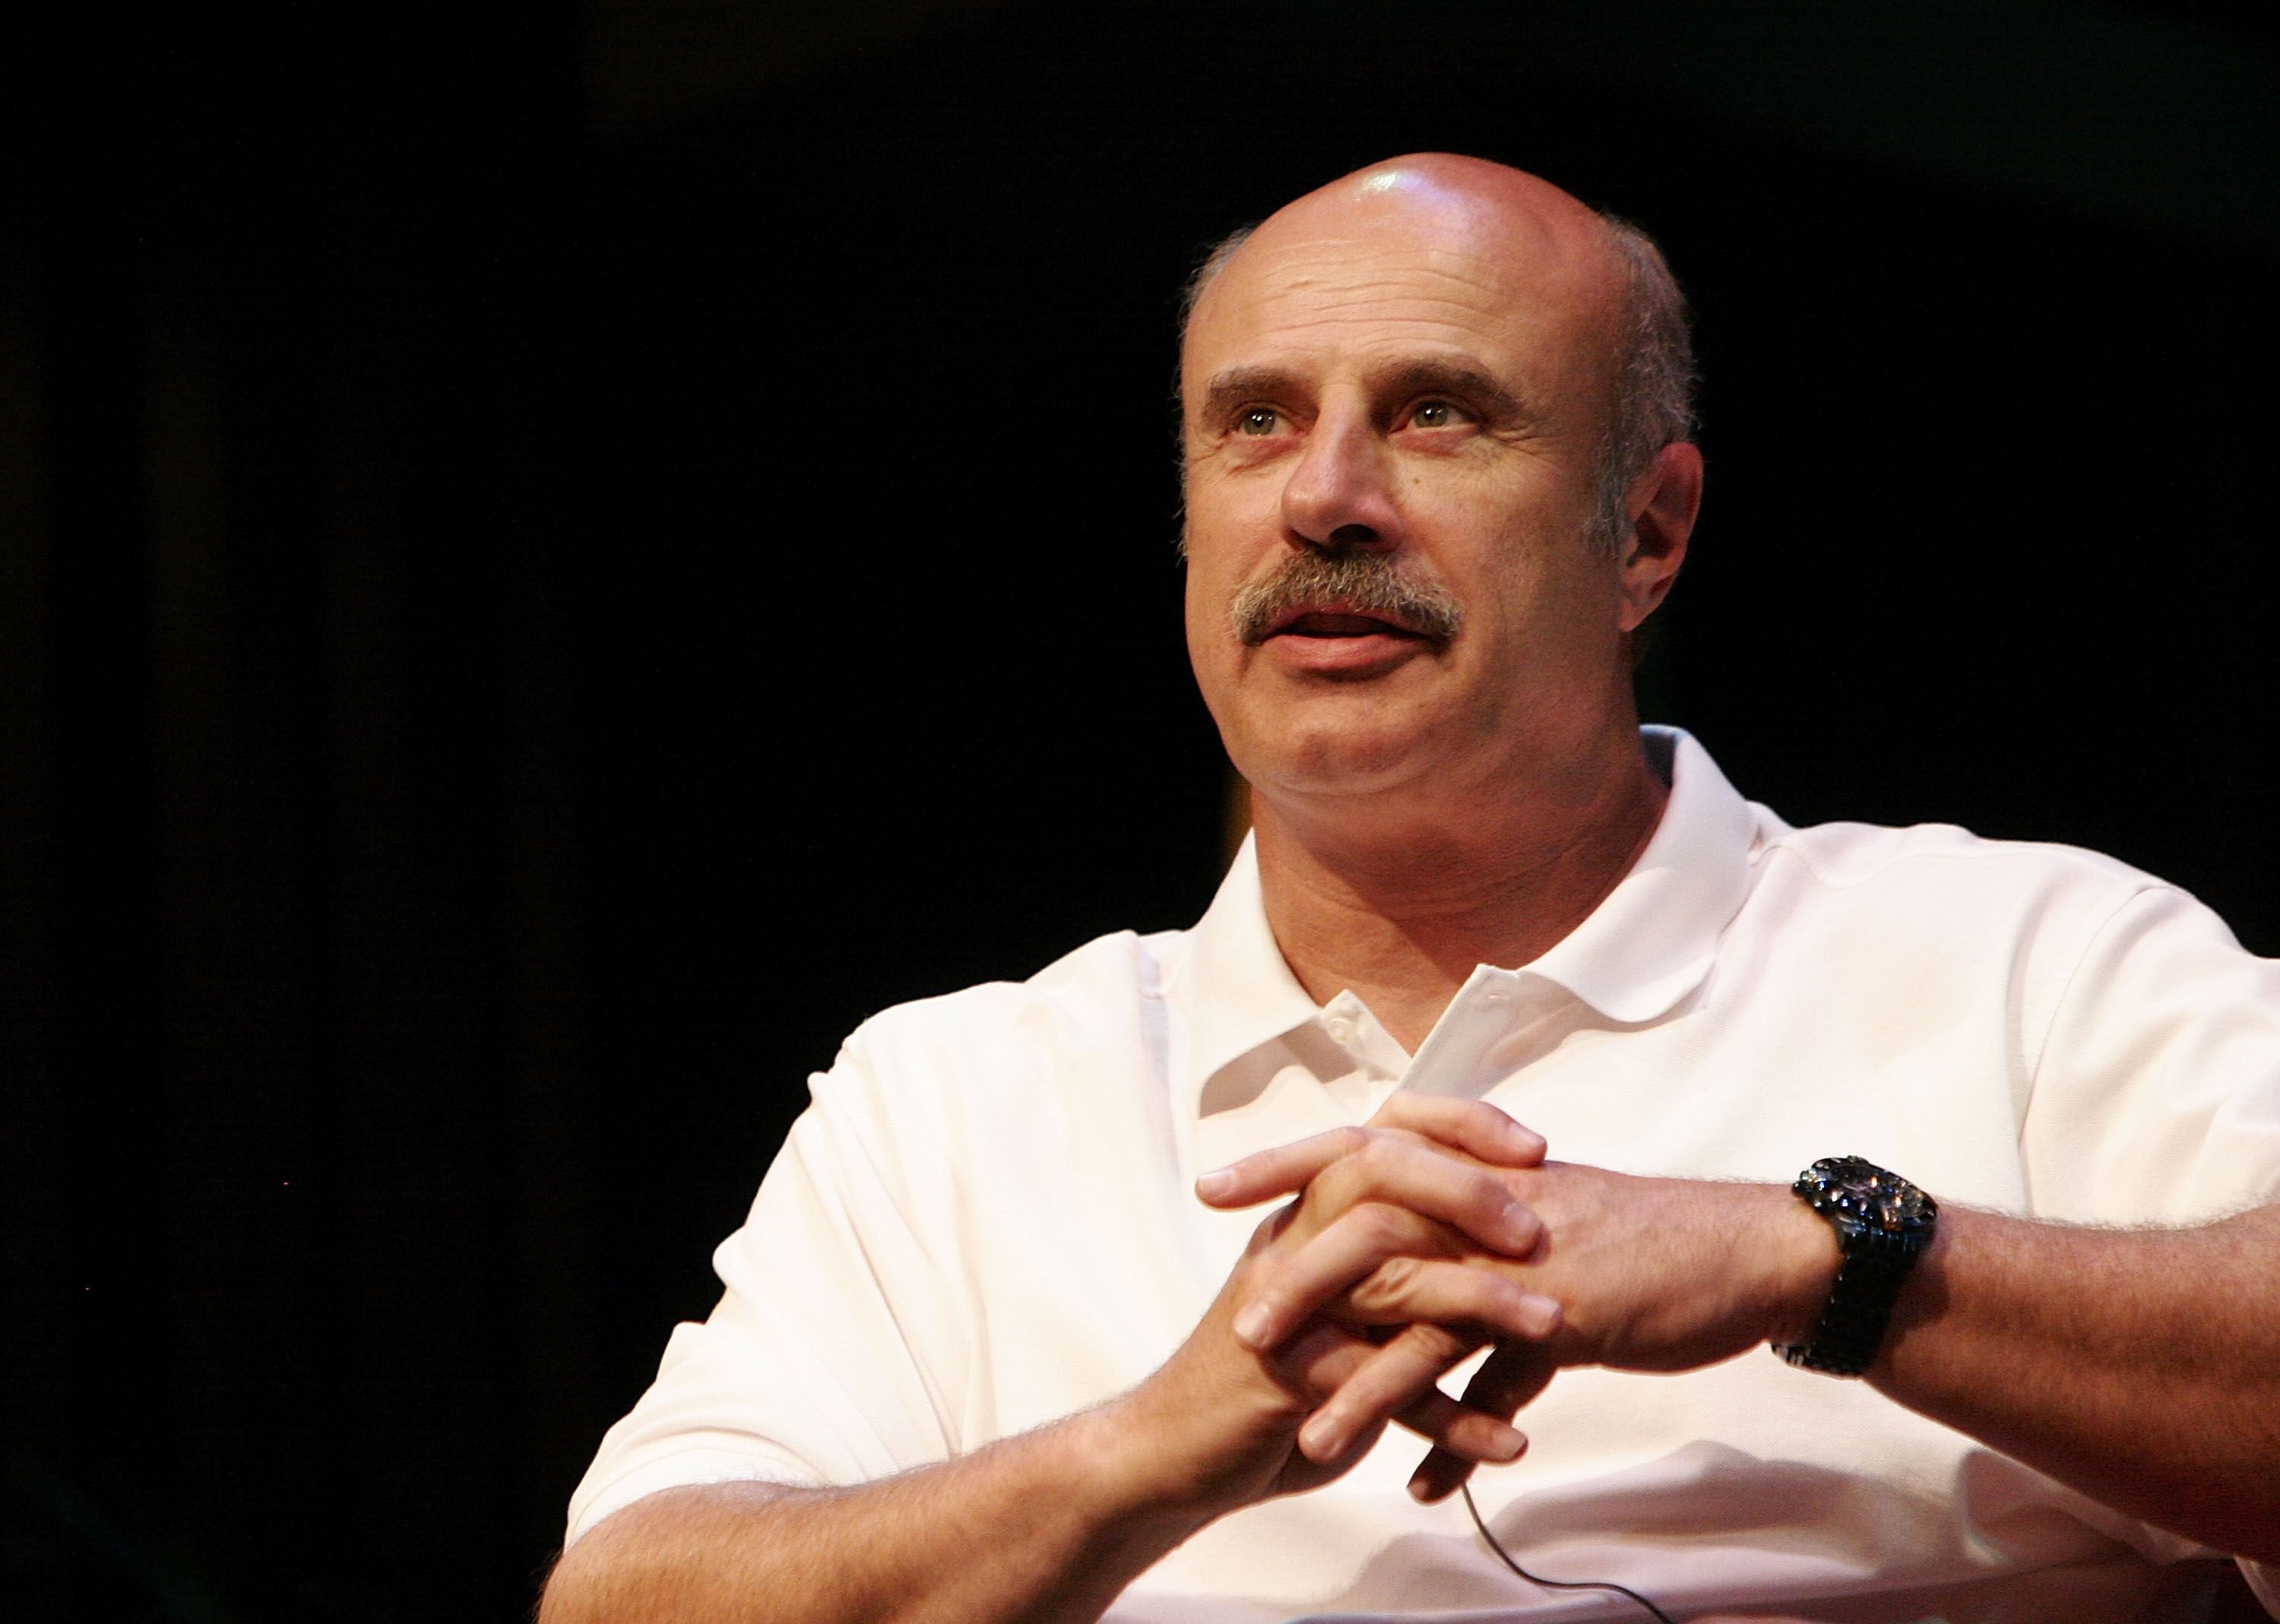 Morgan Stewart's future father-in-law Dr. Phil McGraw at the 12th Annual L.A. Times Festival of Books in 2007 | Source: Getty Images